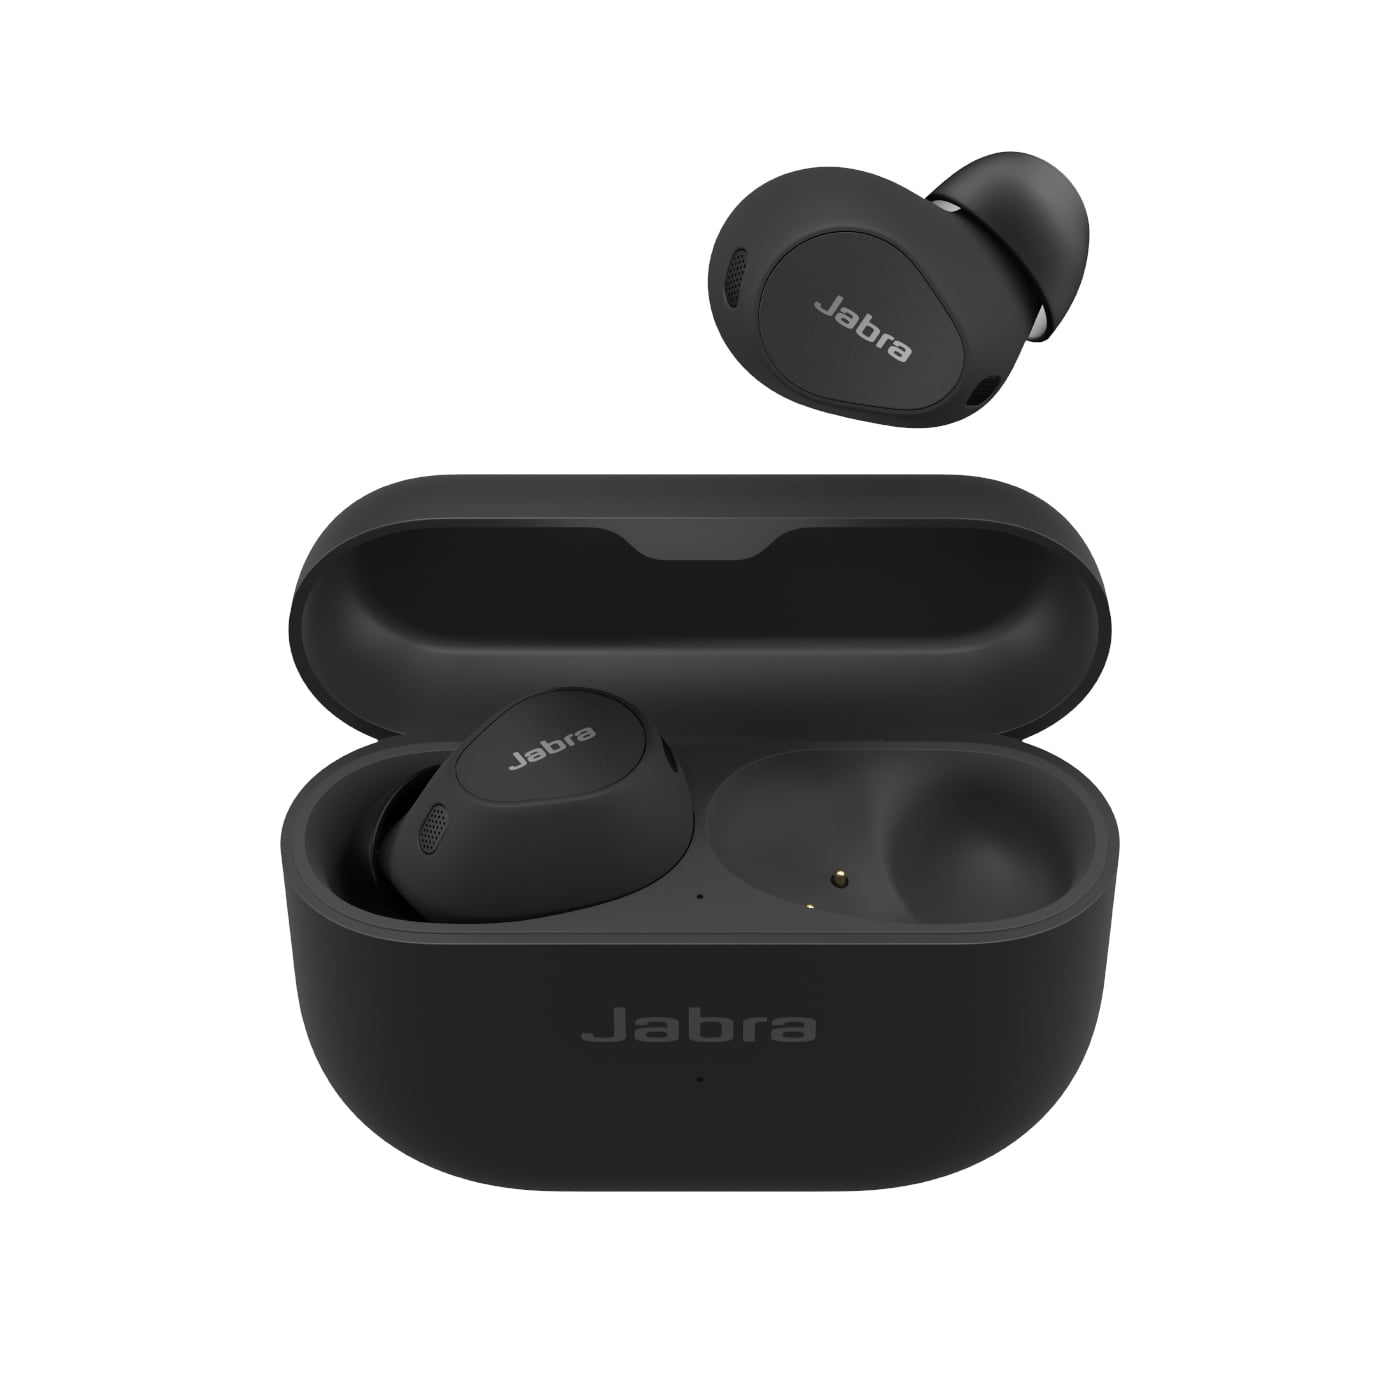  Jabra Elite 10 True Wireless Bluetooth Earbuds – Advanced  Active Noise Cancelling with Dolby Atmos Surround Sound, All-Day Comfort,  Multipoint, Crystal-Clear Calls – Cocoa : Everything Else